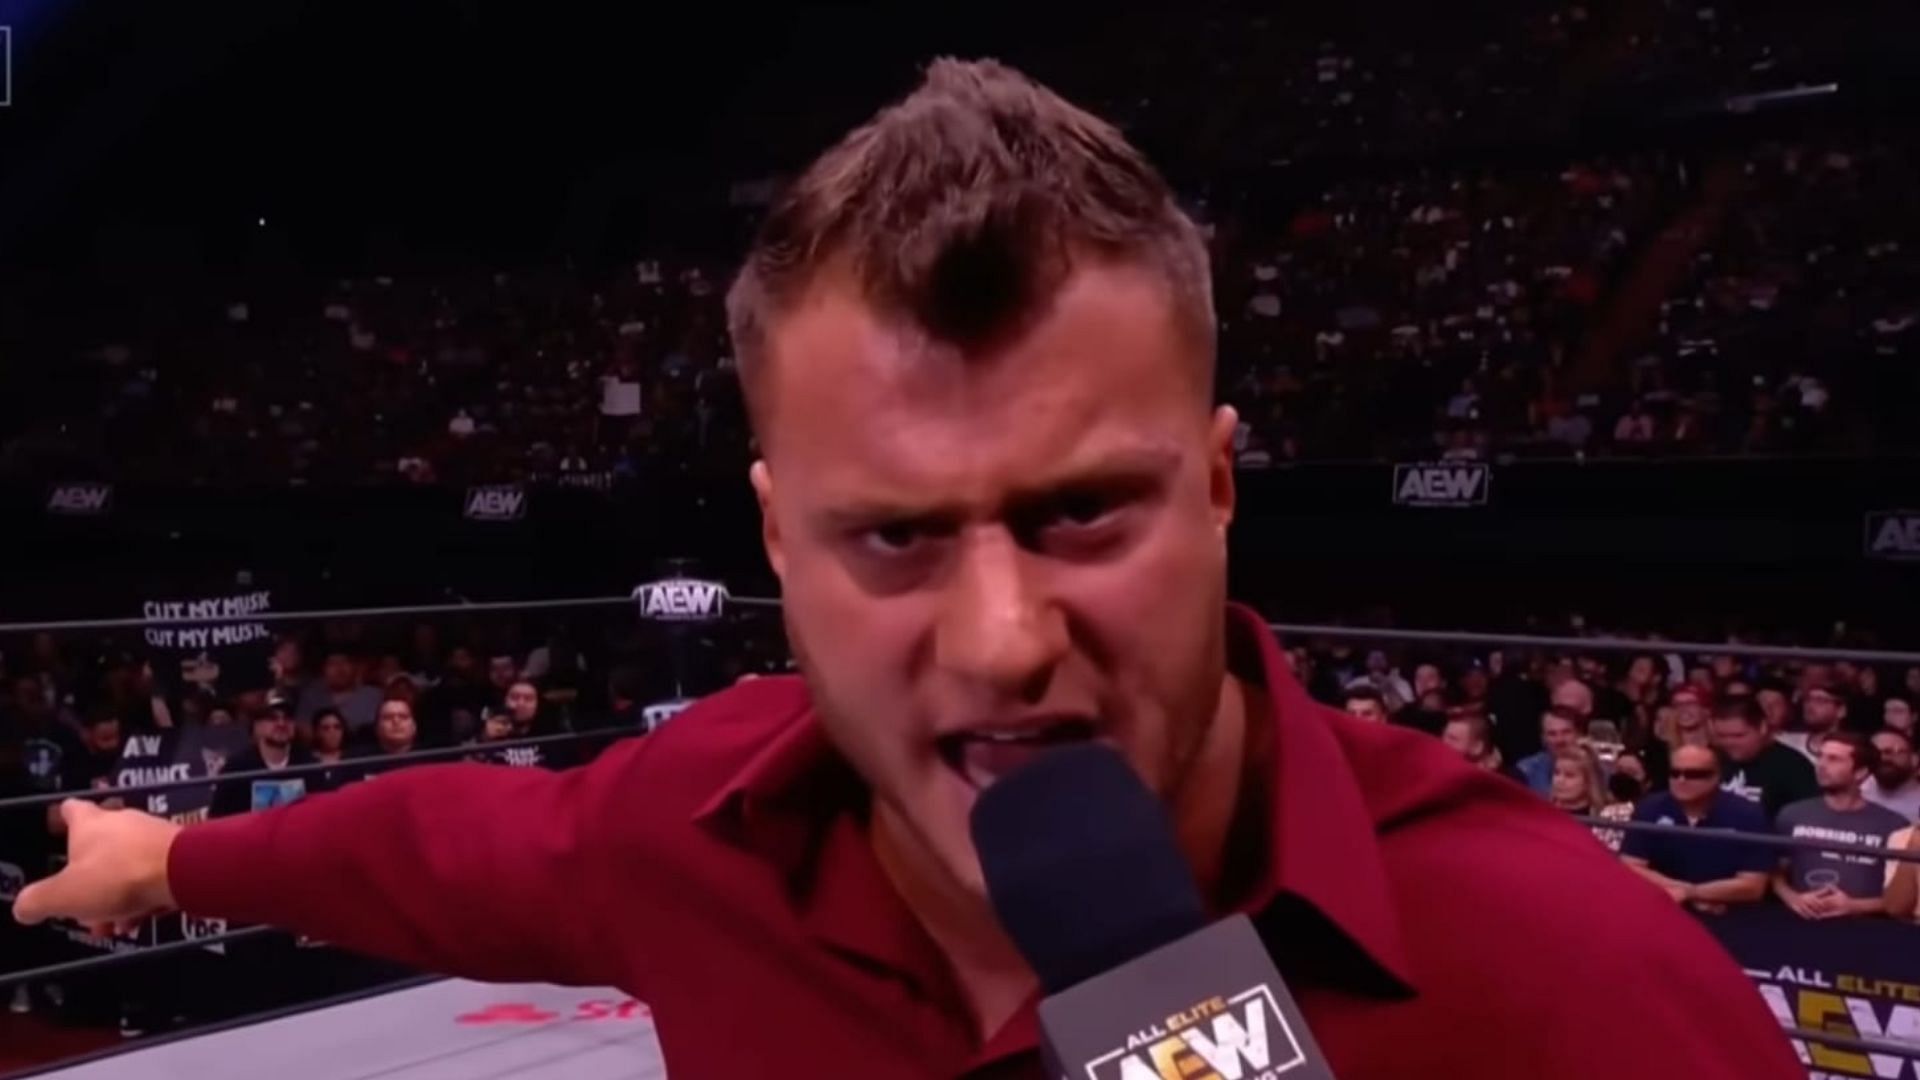 MJF has had very public issues with Tony Khan and AEW